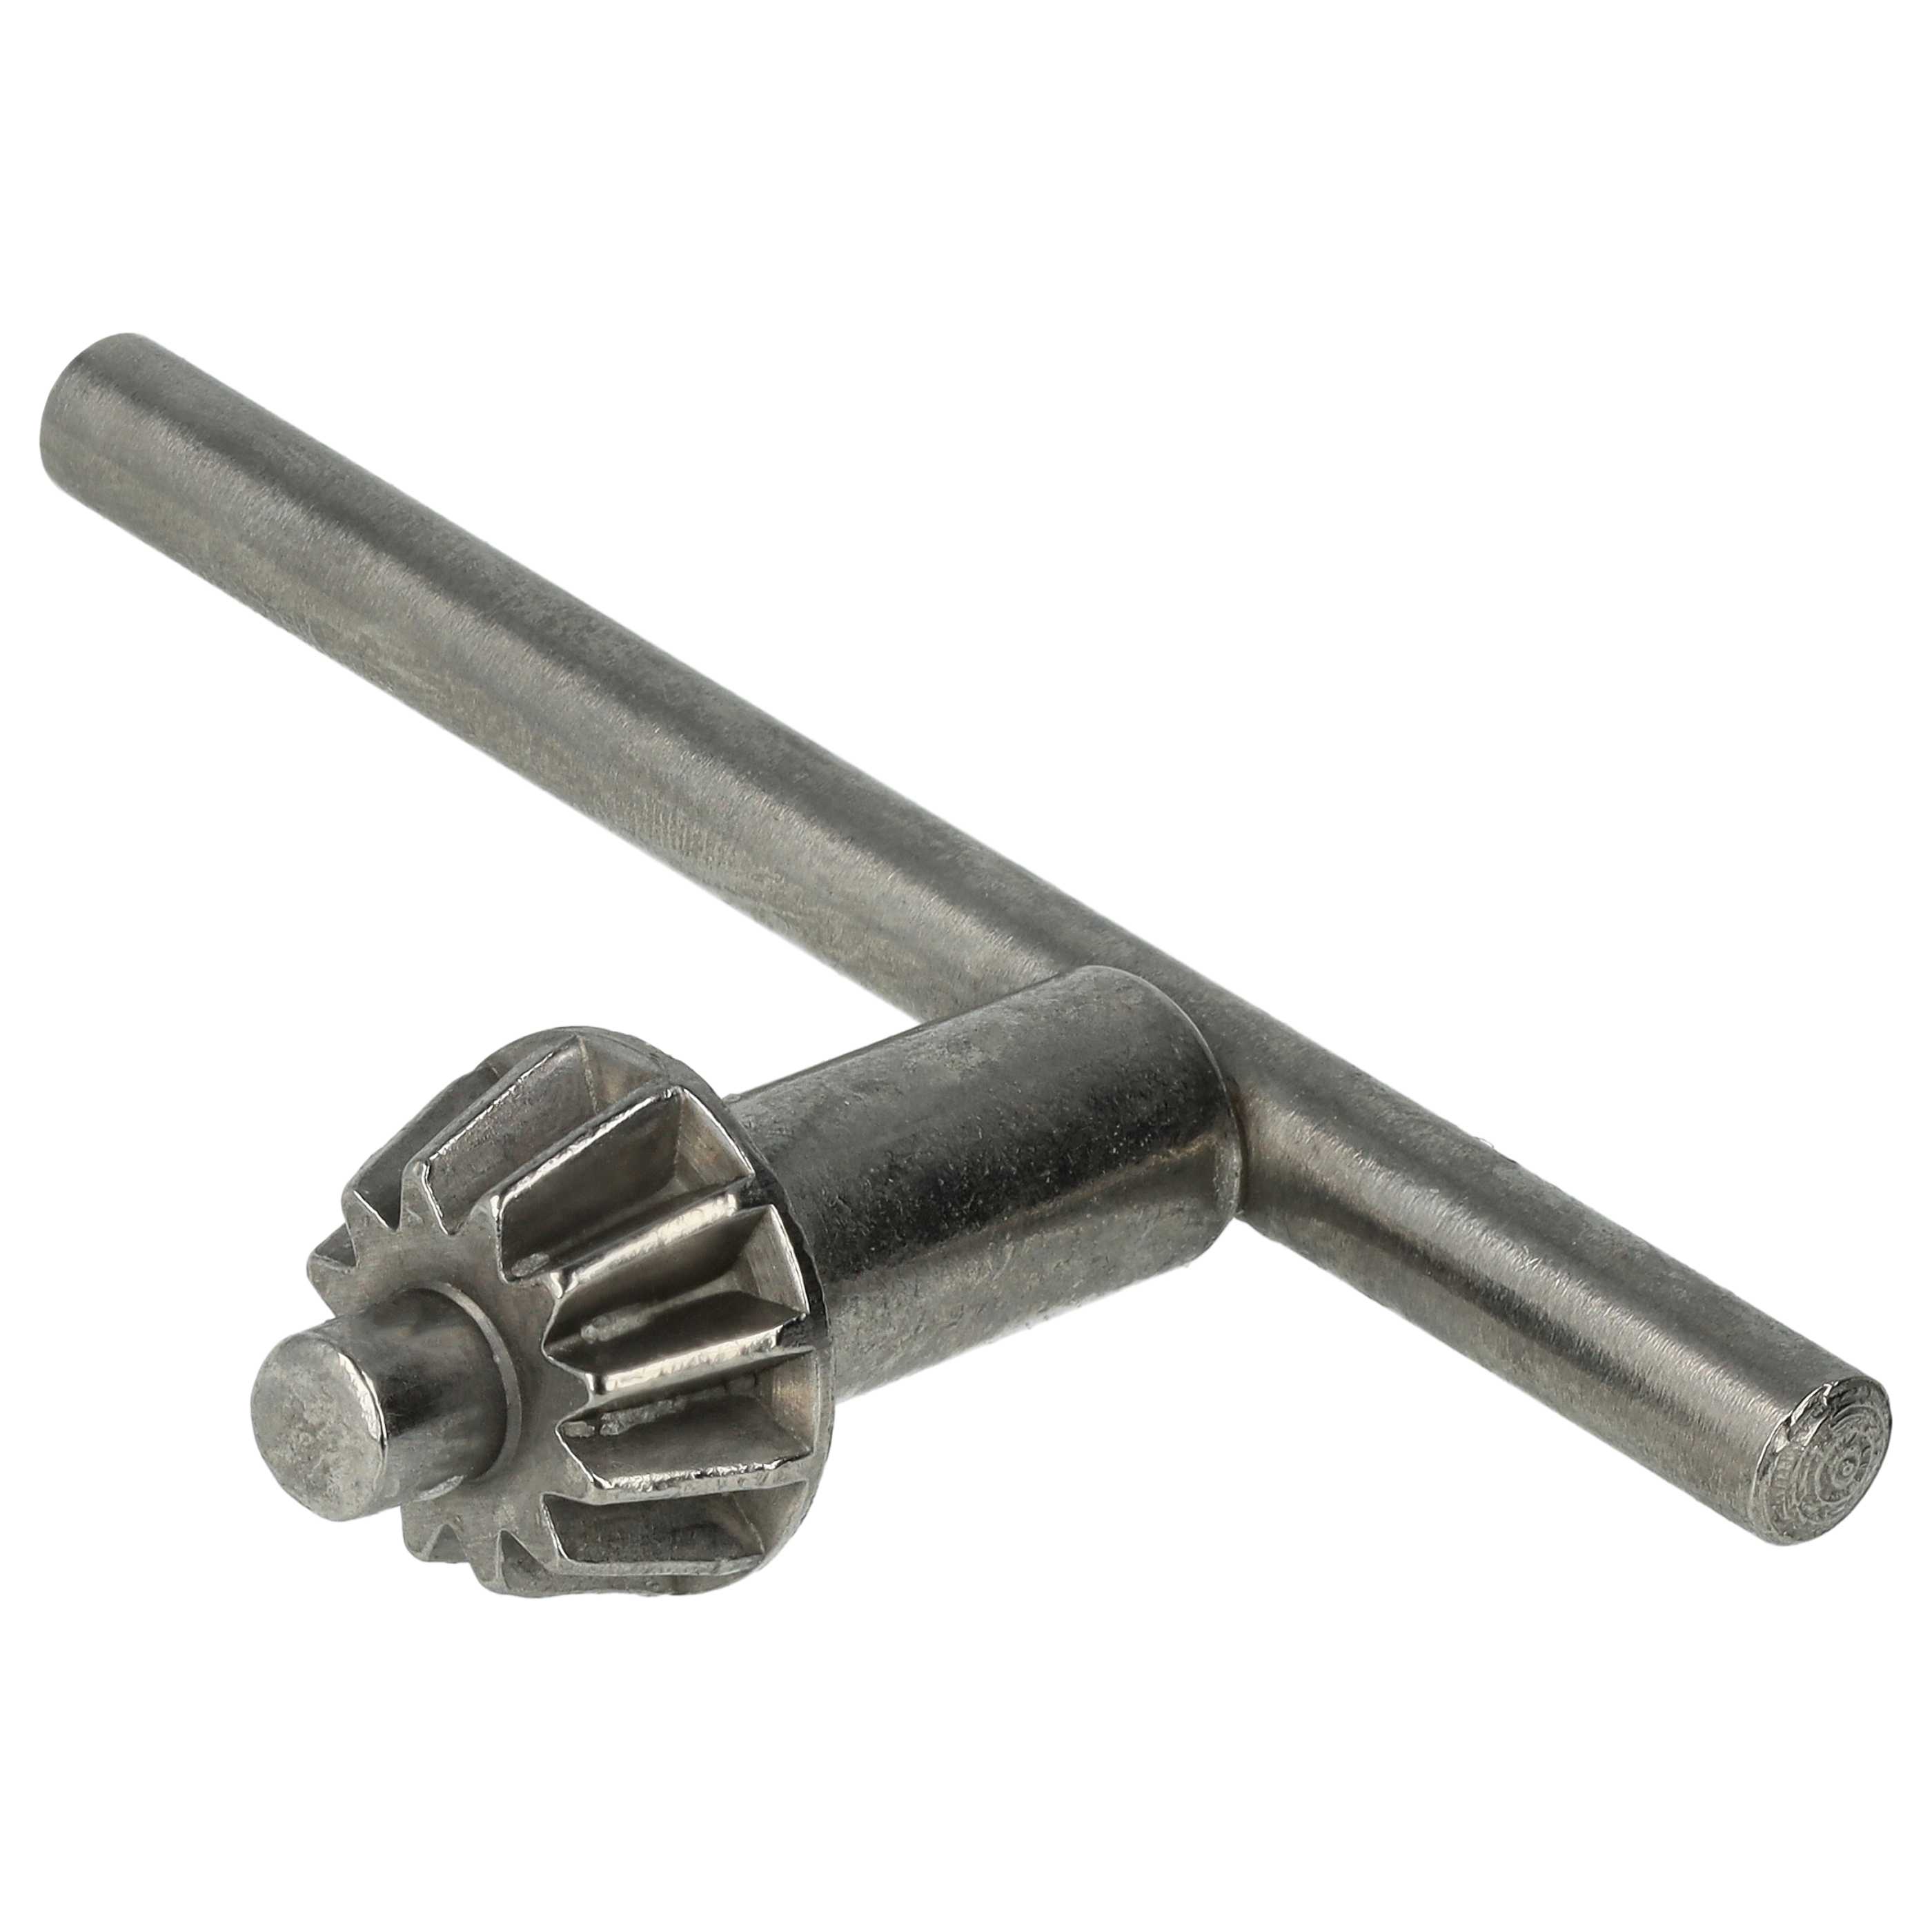 10x Drill Chuck Key S2A 10-13mm replaces Wolfcraft 2630000 for Drills from e.g. Metabo, AEG